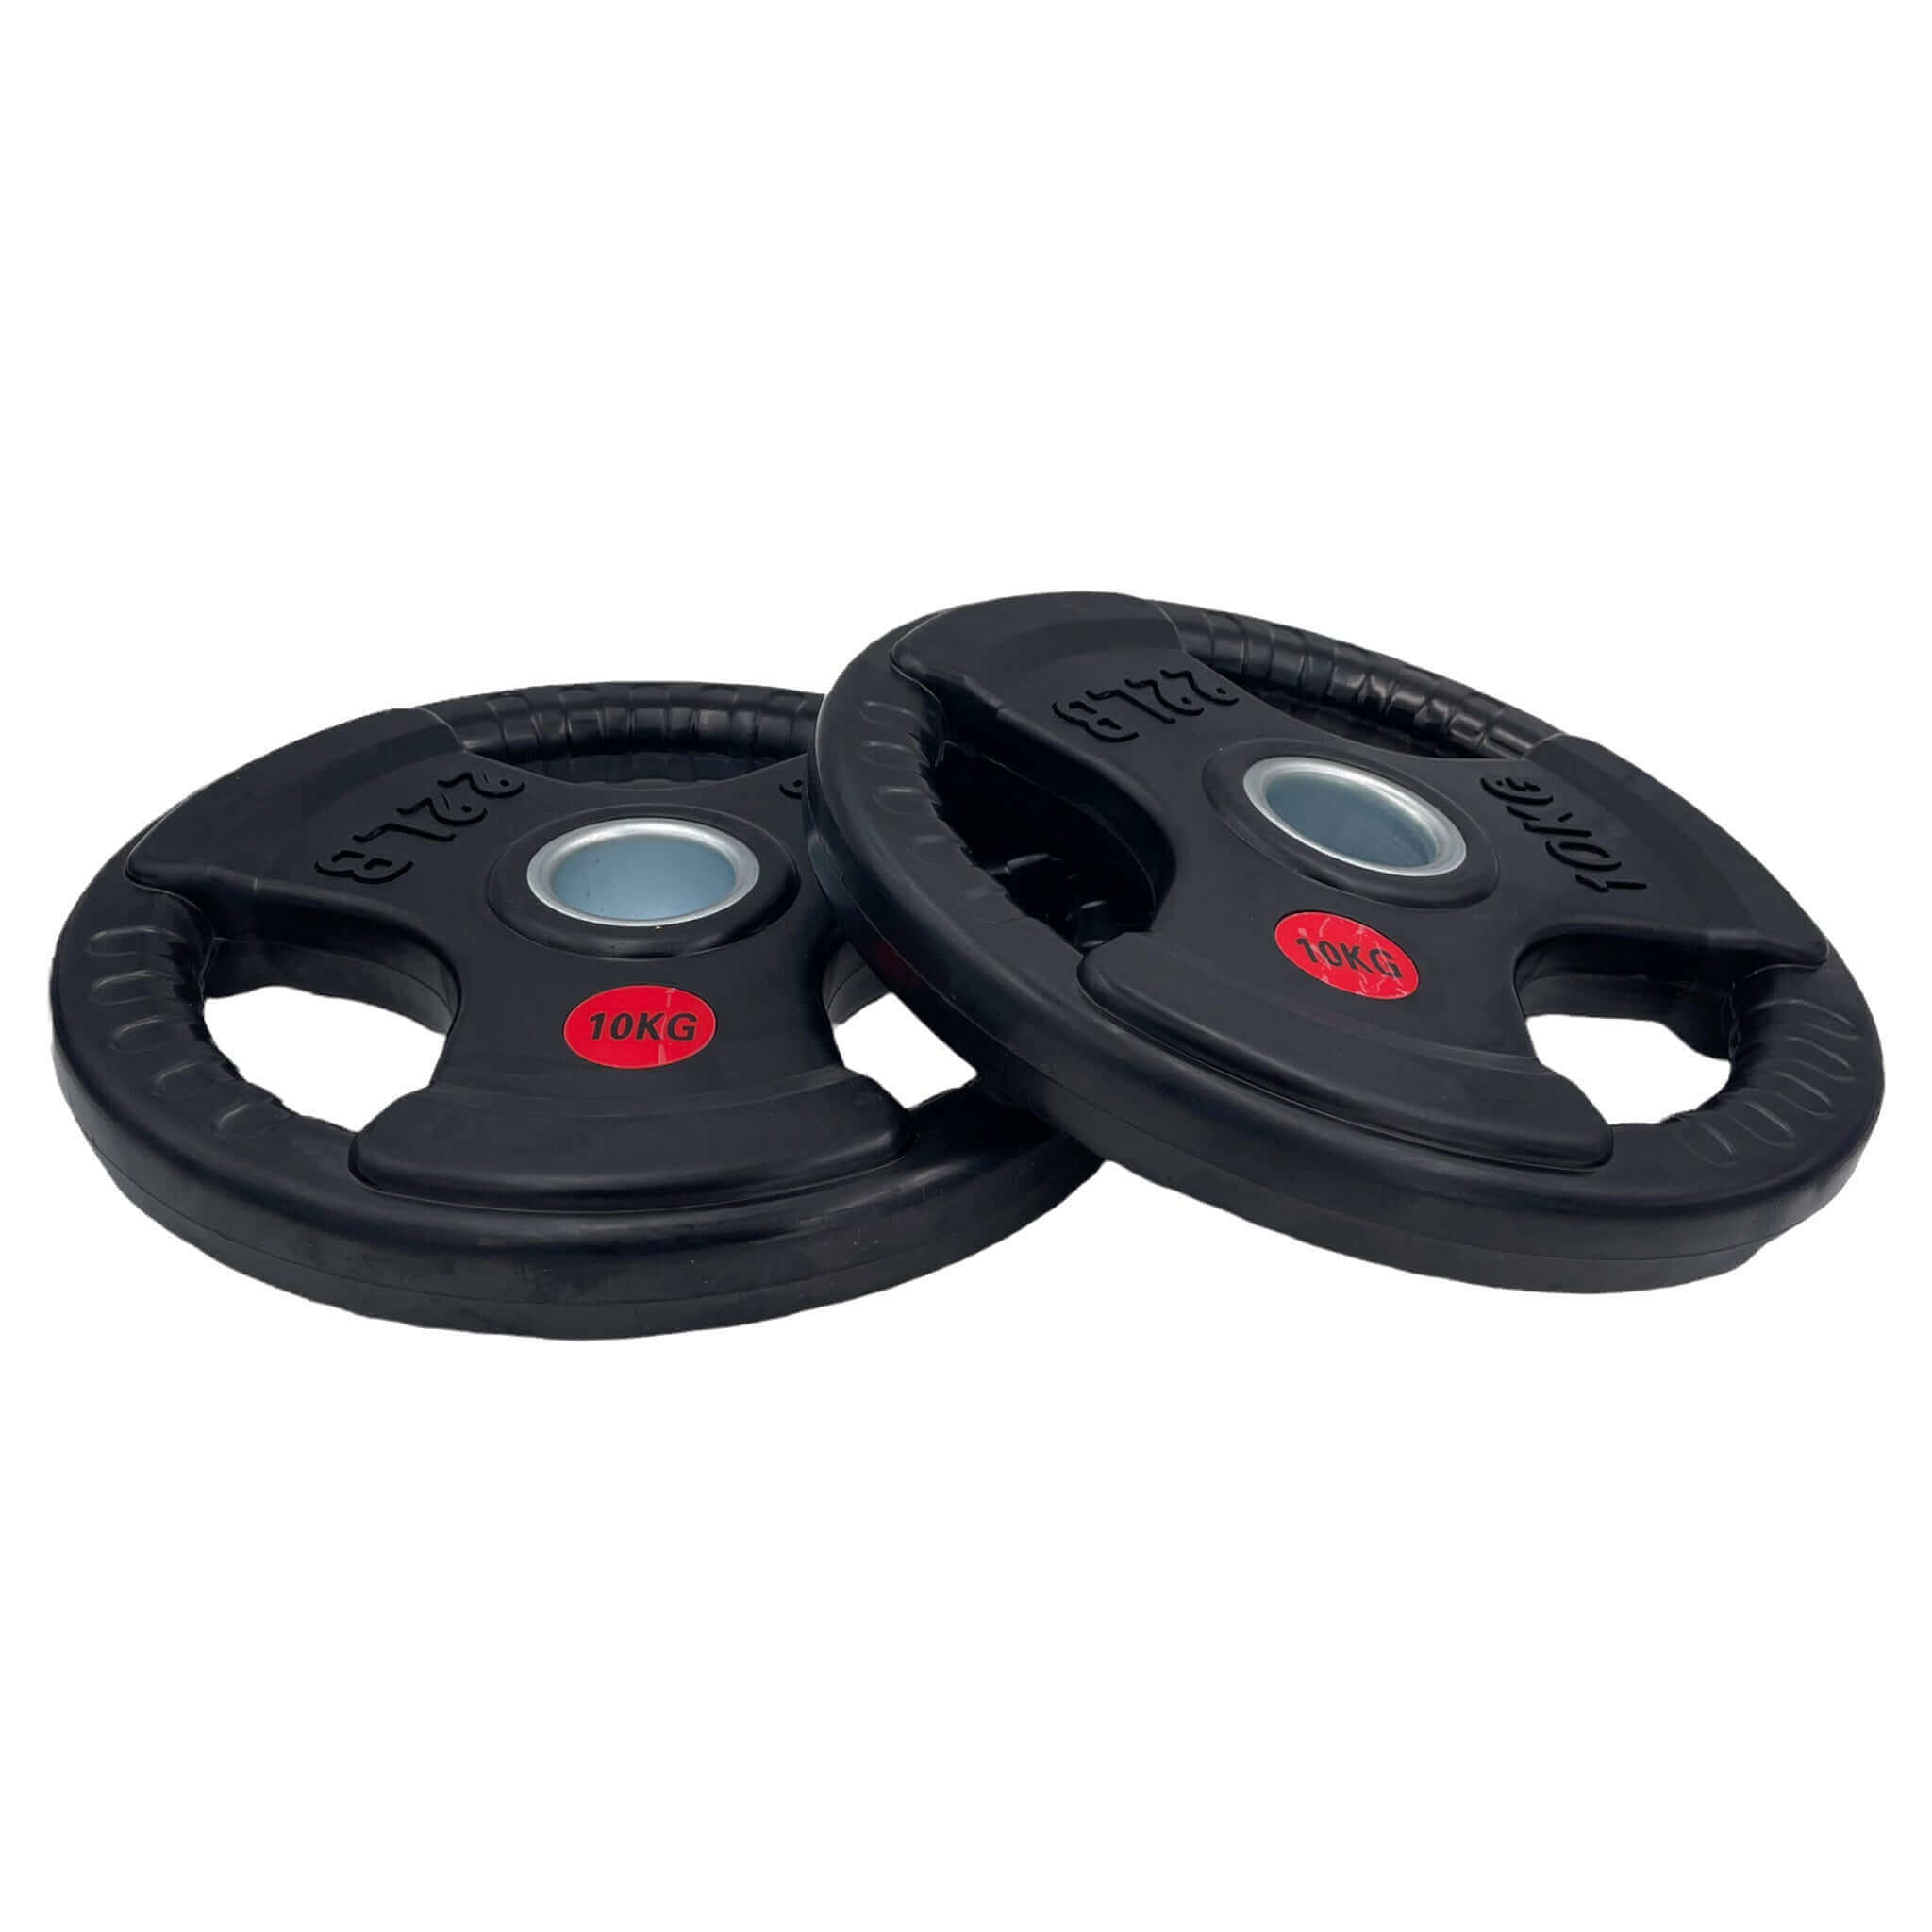 150kg Rubber Coated Type-O Tri-Grip Weight Plates and Barbell Bundles | Tri Grip Rubber Plates | INSOURCE